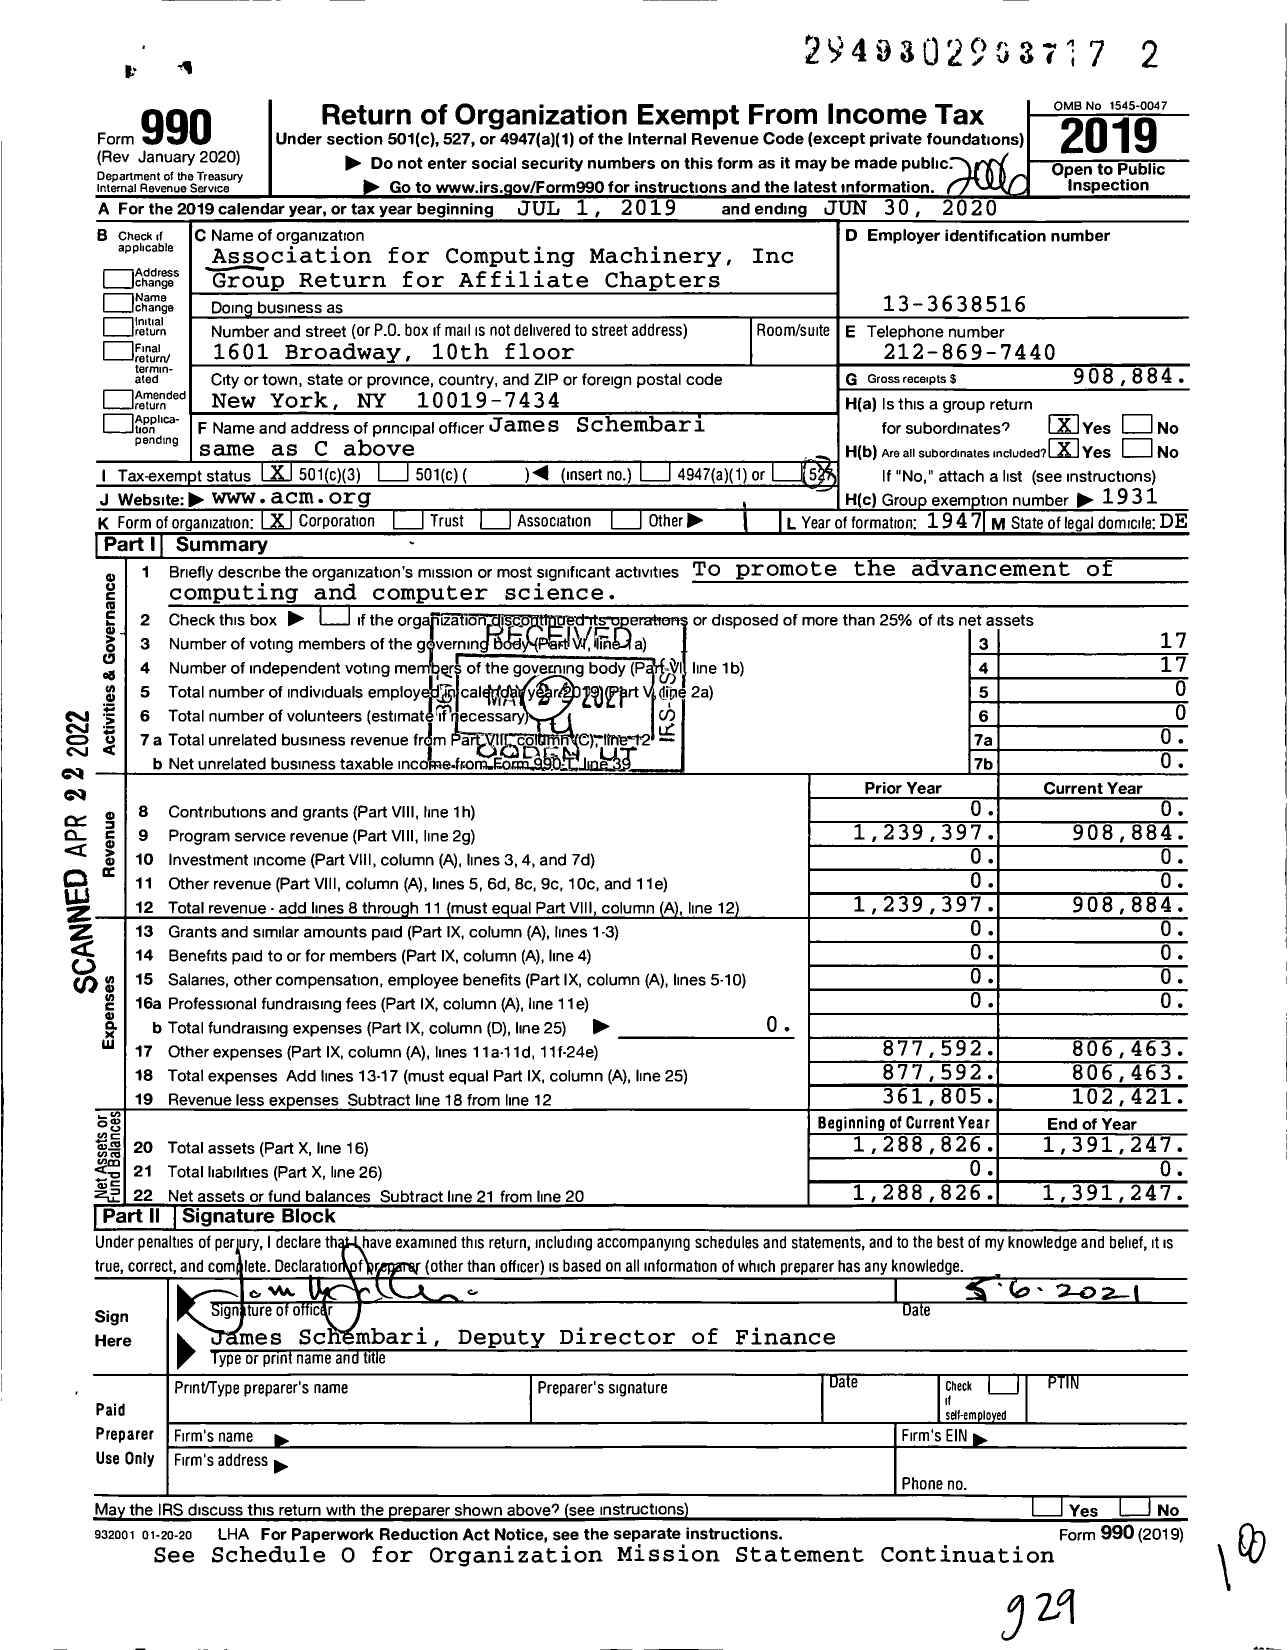 Image of first page of 2019 Form 990 for Association for Computing Machinery Group Return for Affiliate Chapters